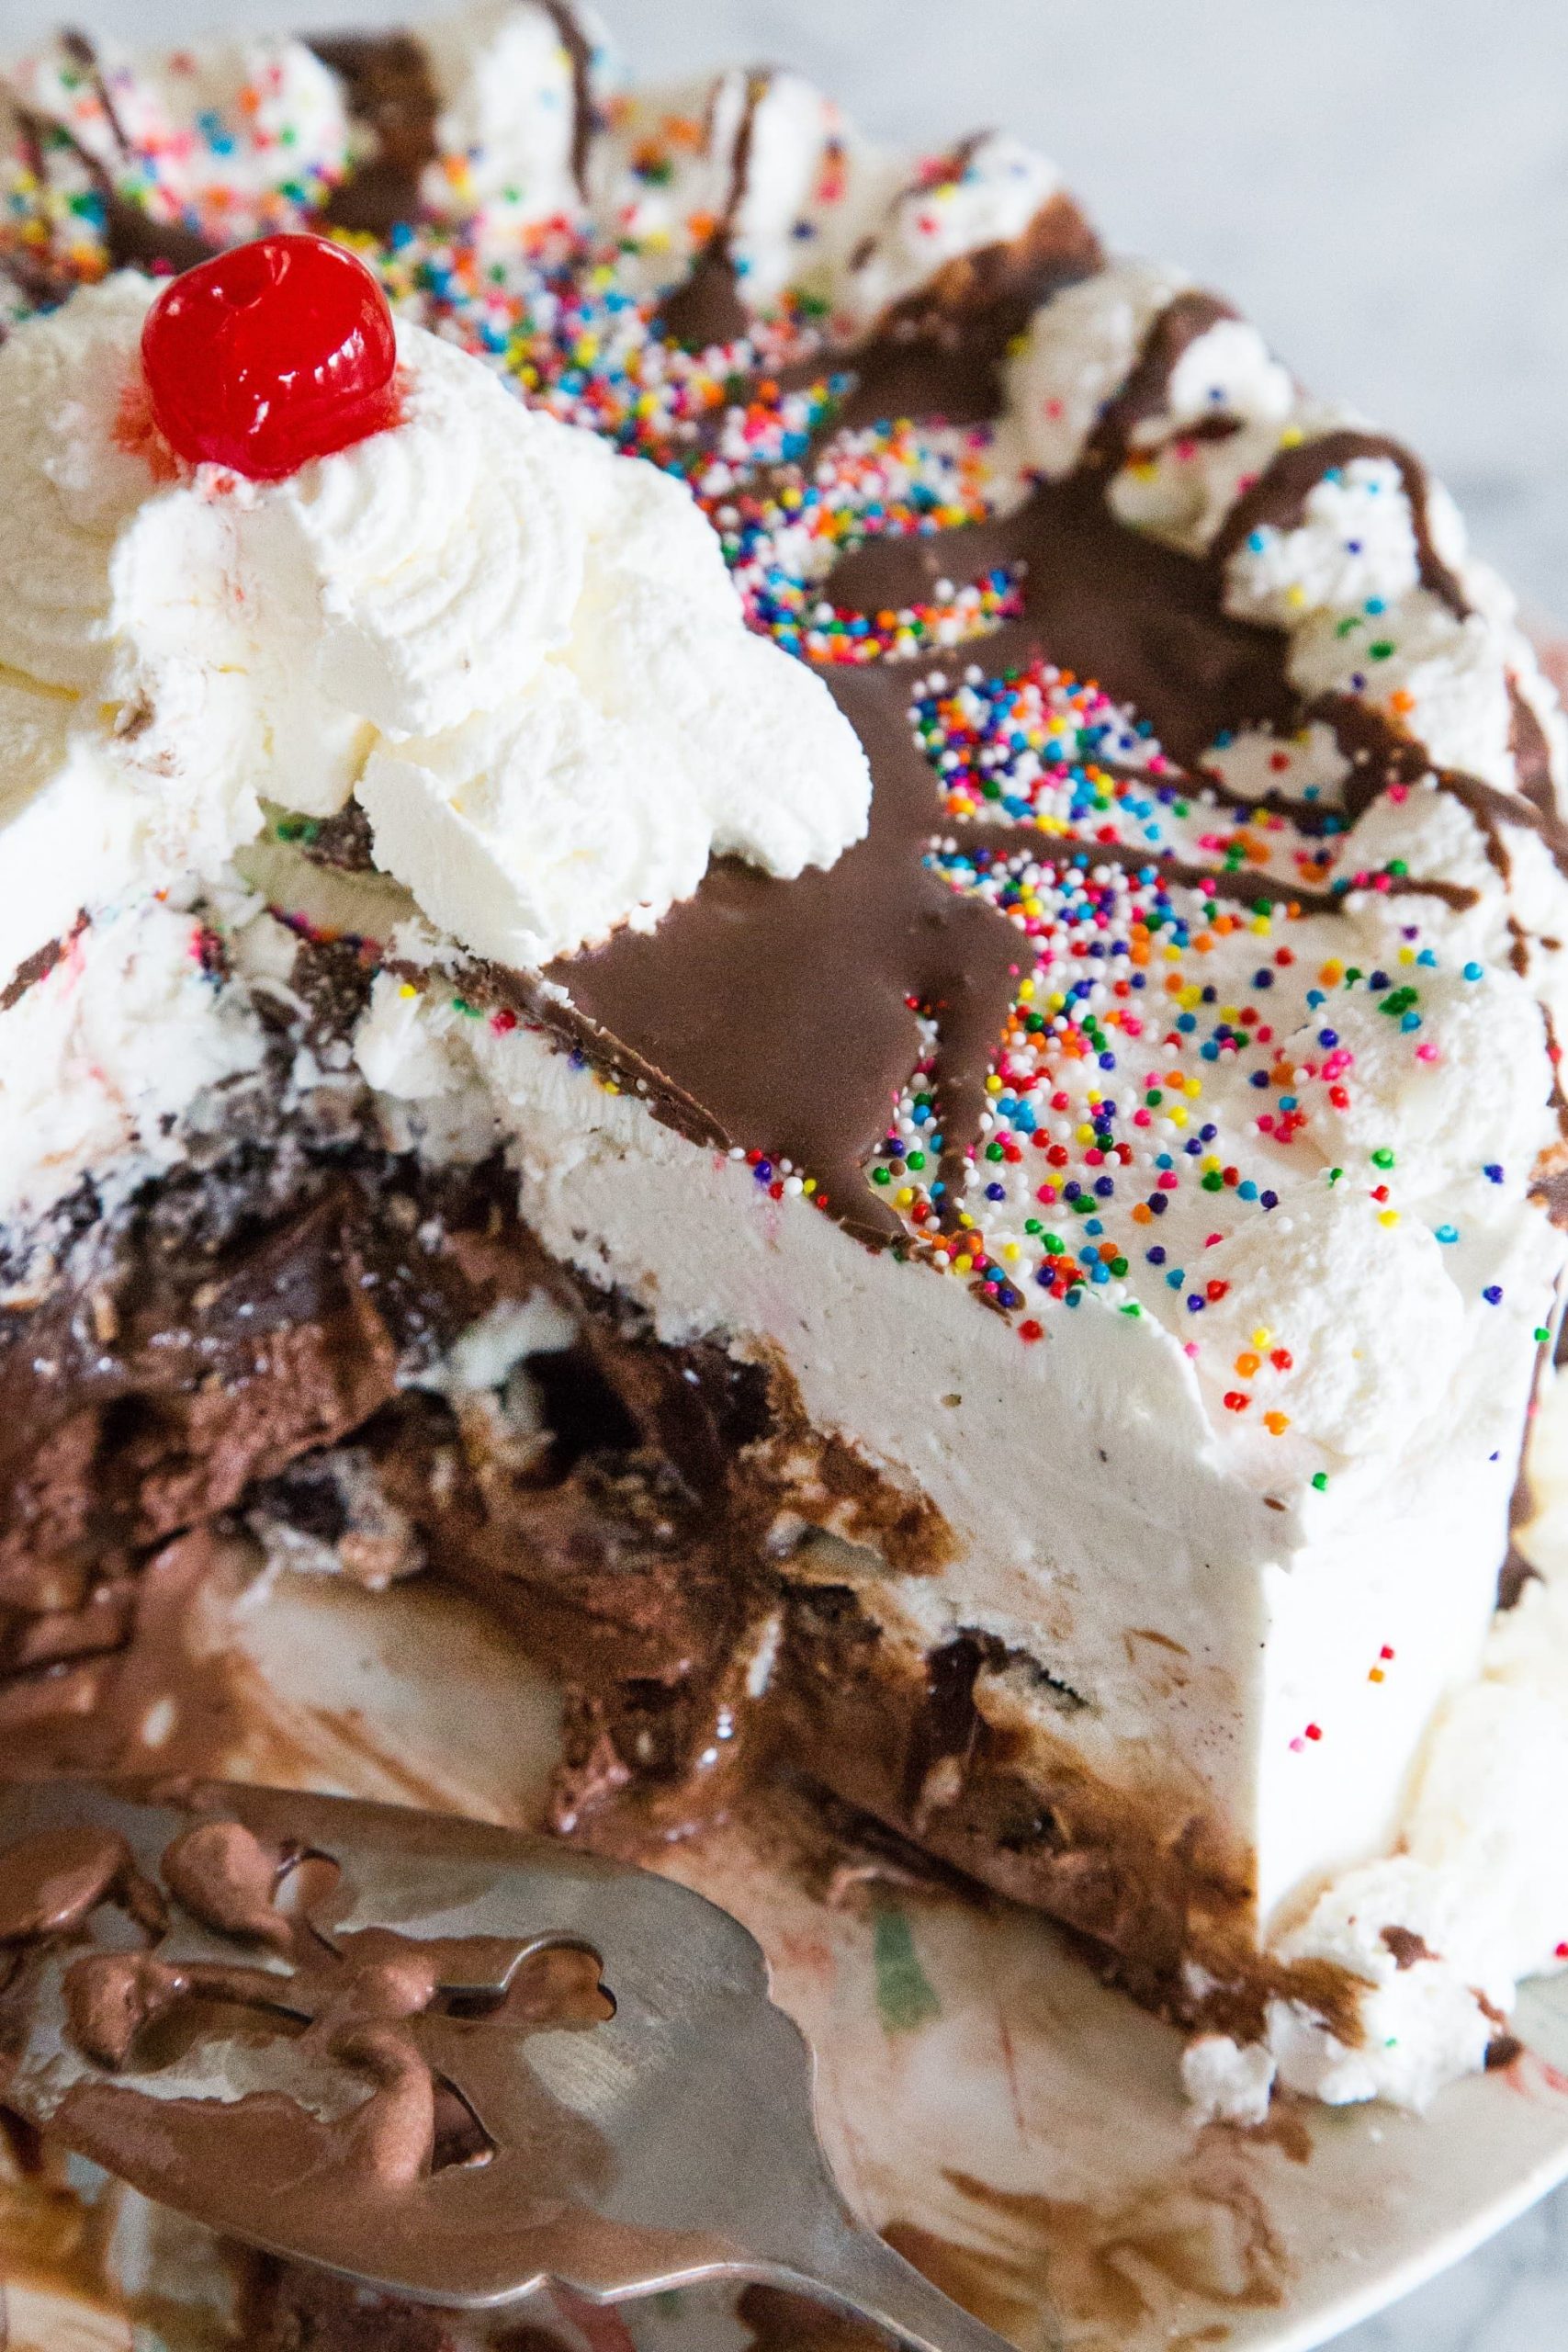 How To Make an Ice Cream Cake (Even Better than Dairy ...